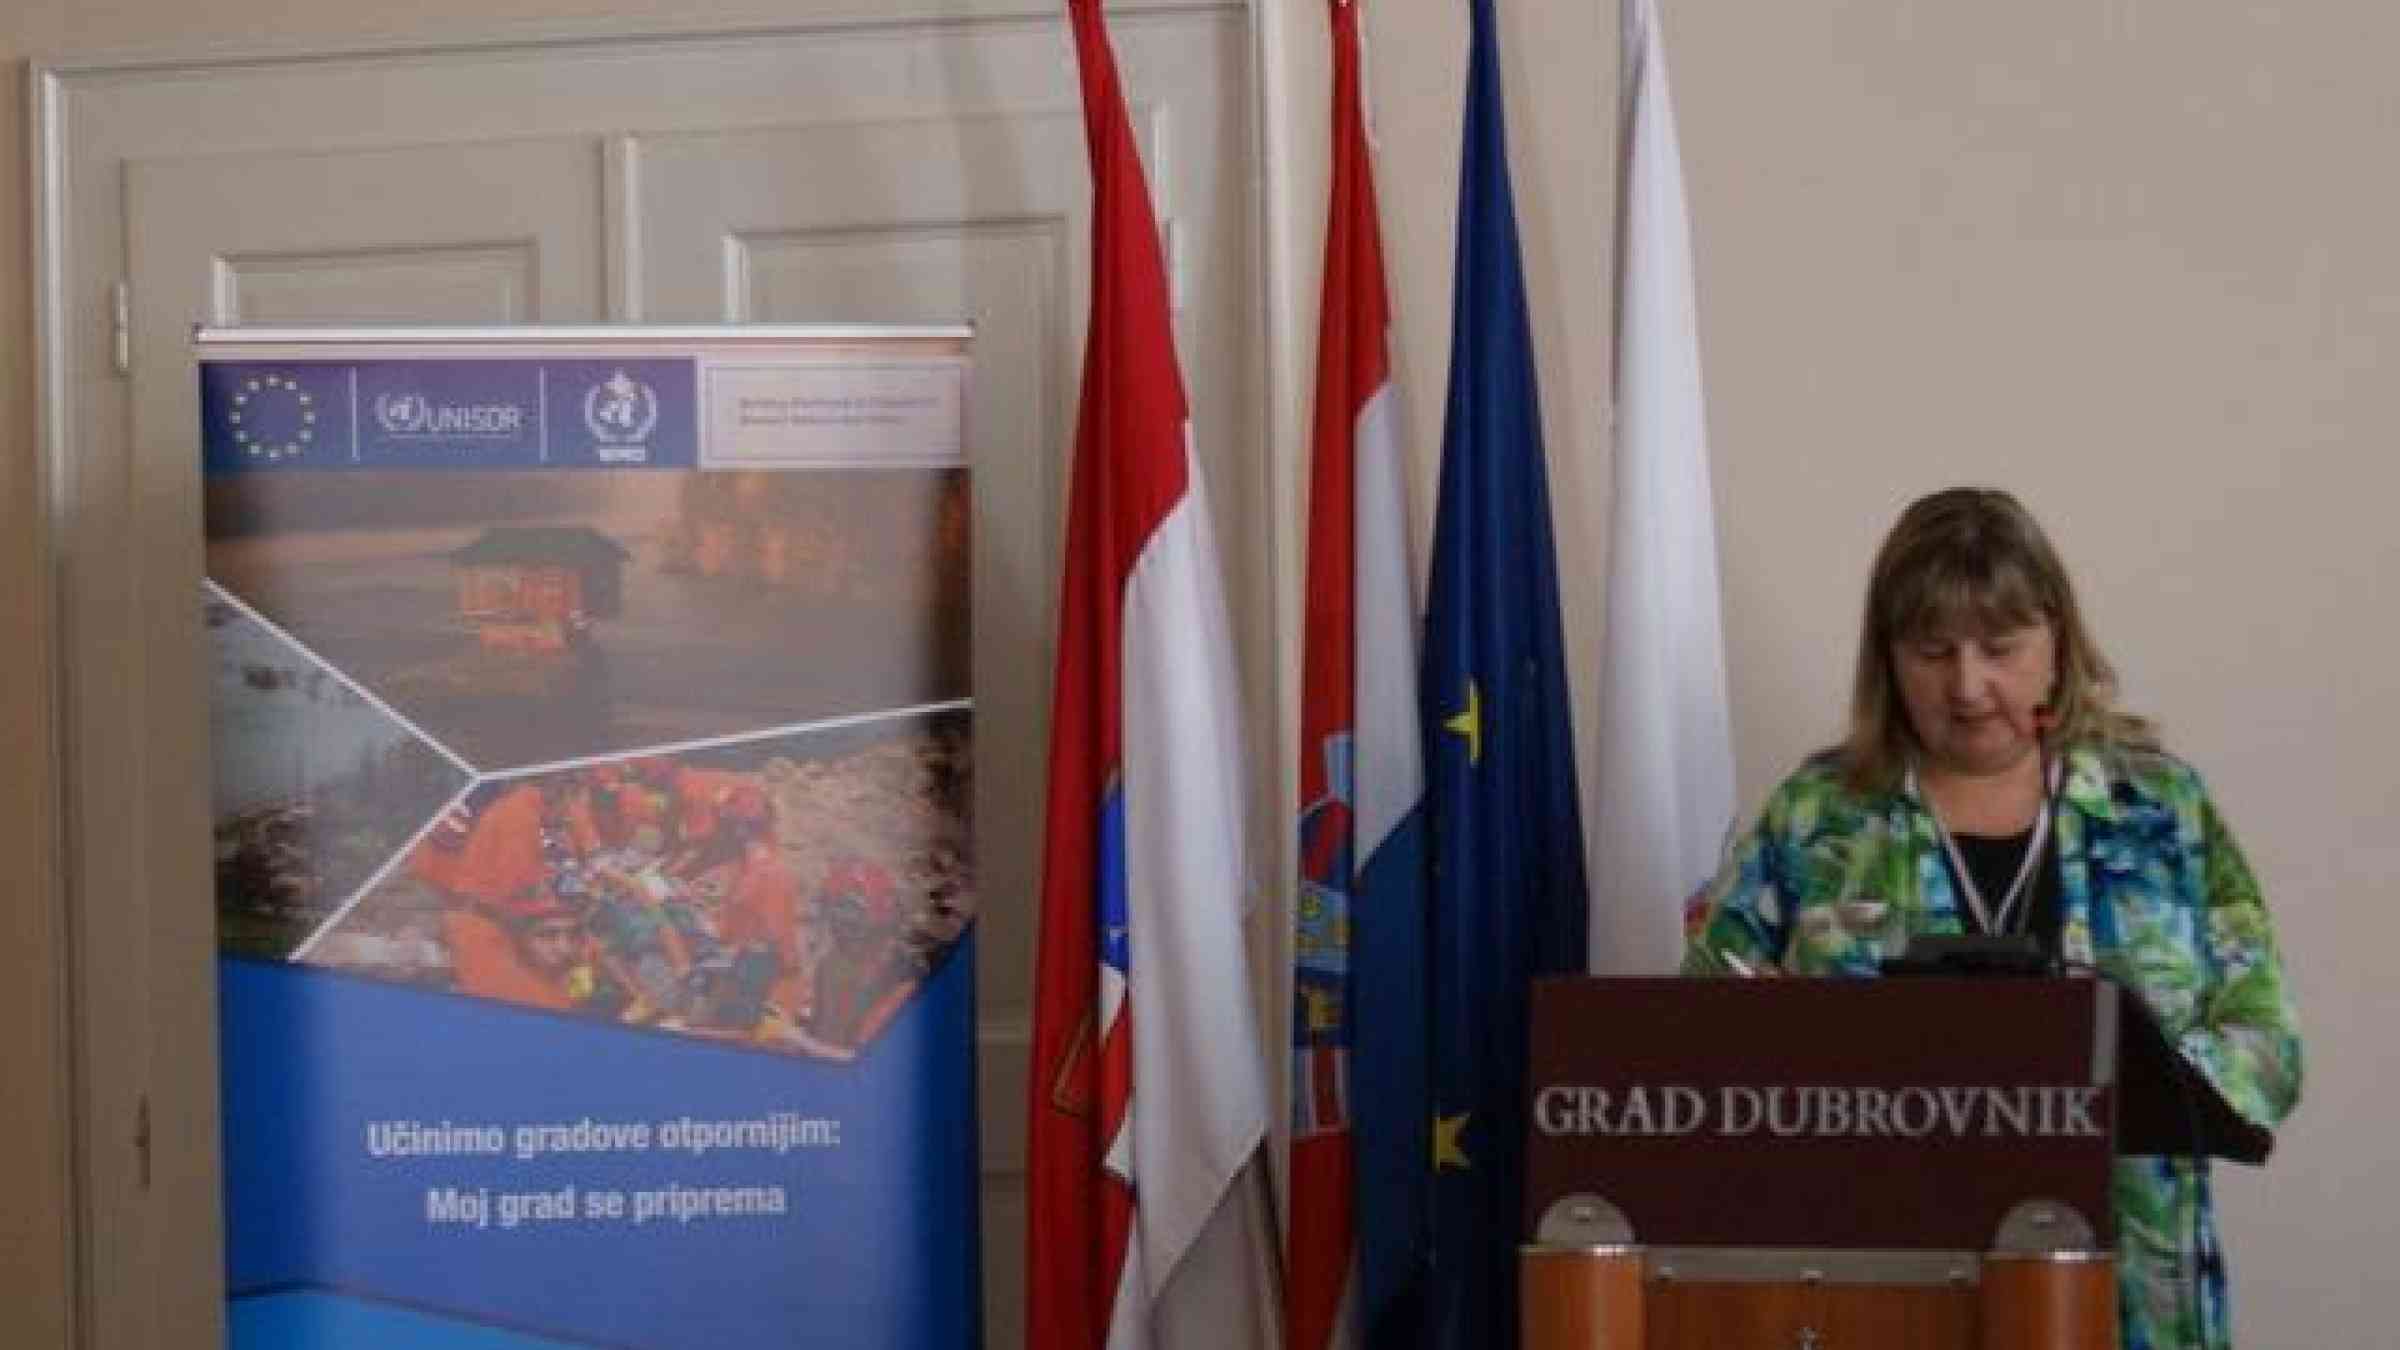 Clarion call: Ms. Anita Buric, Head of Dubrovnik's Department for Municipal Utilities and Local Government emphasizes the importance of building a resilient future.